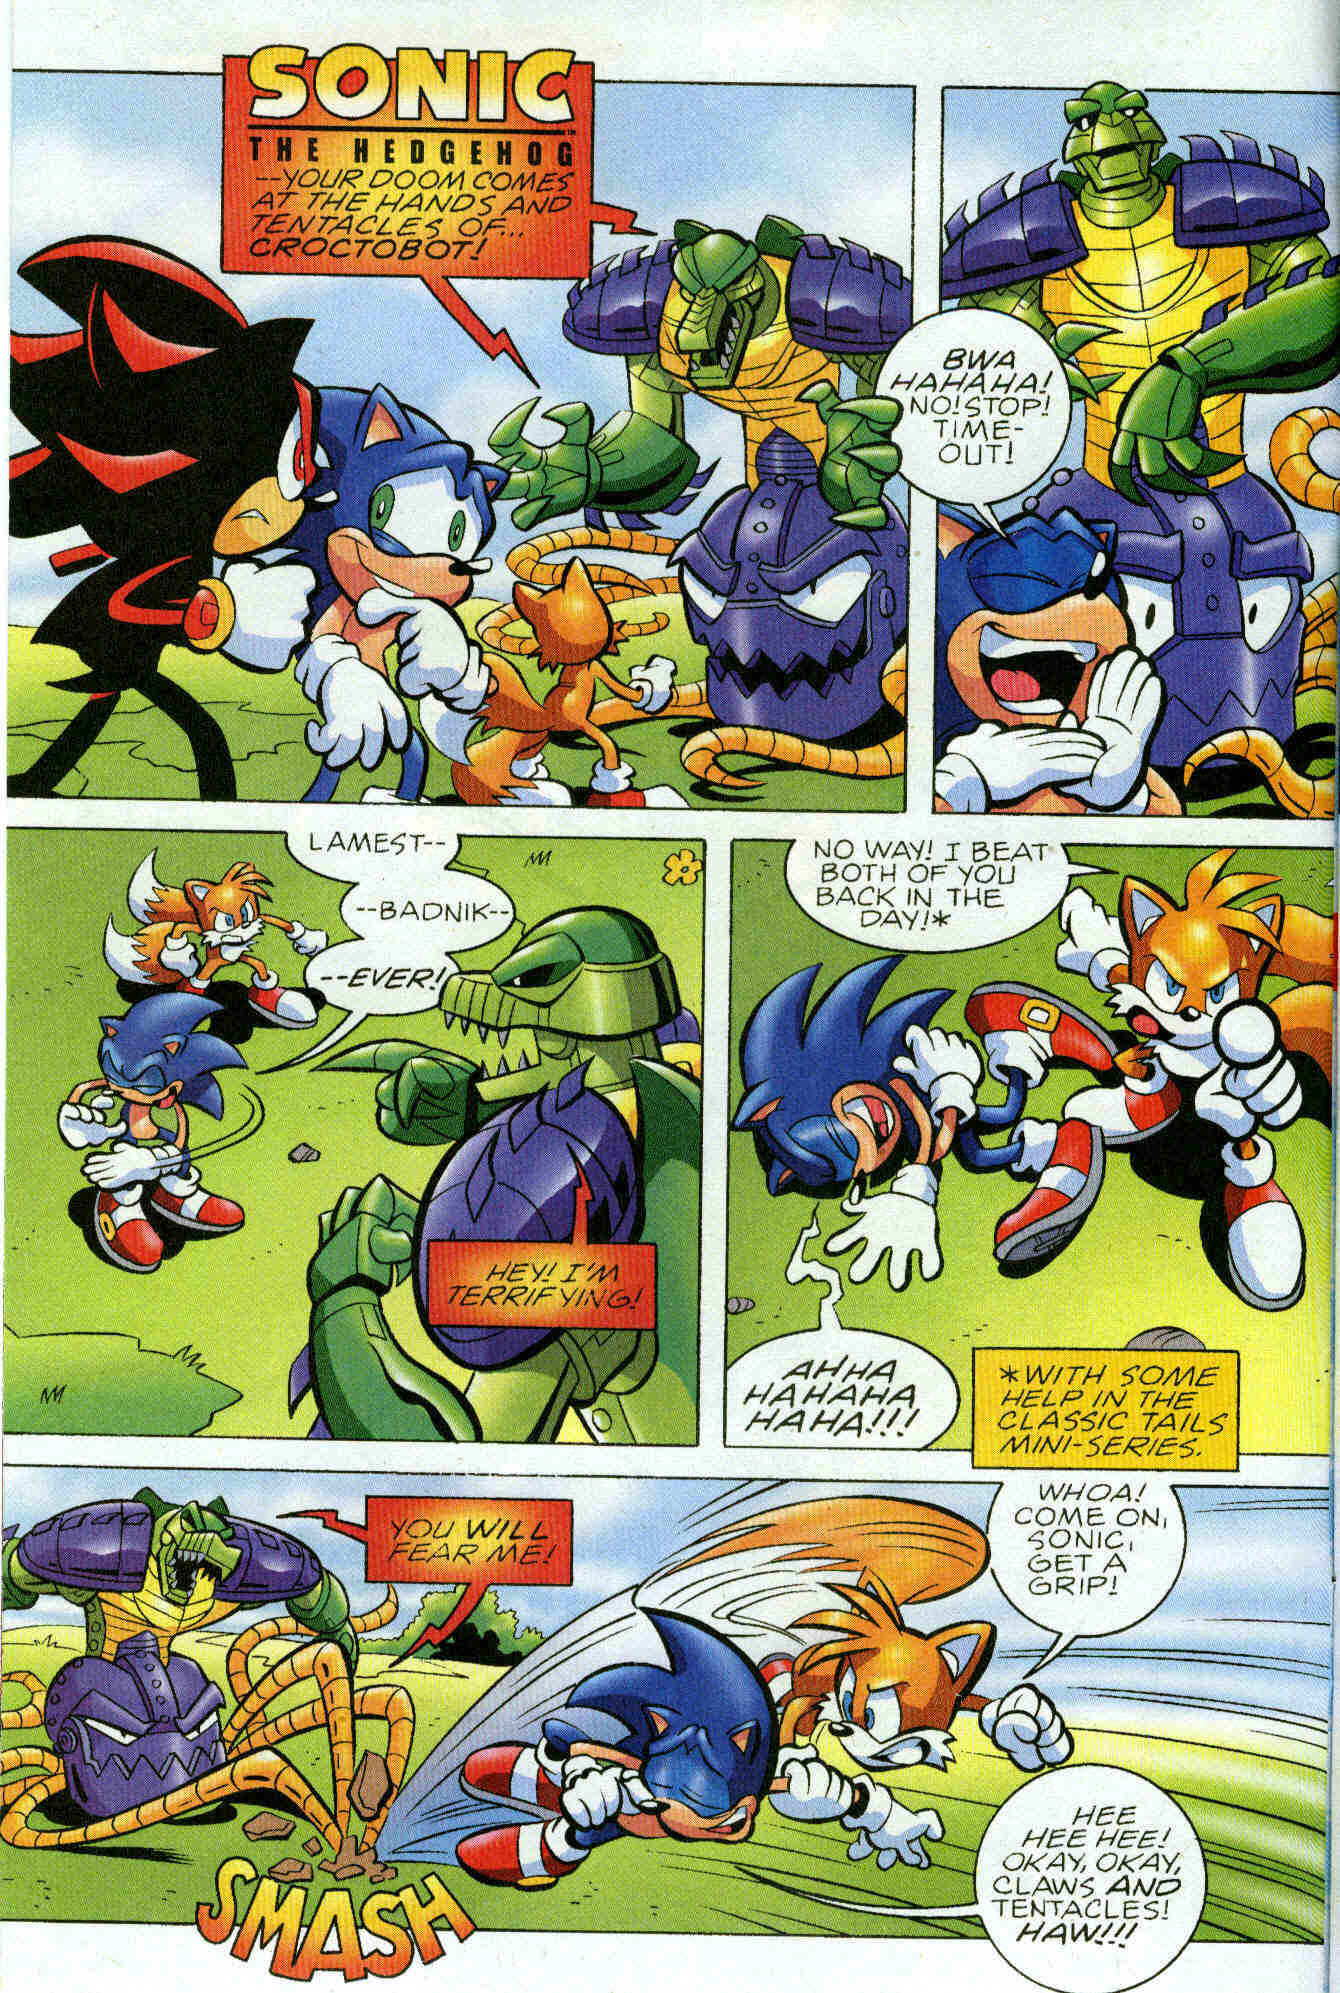 Sonic - Archie Adventure Series June 2006 Page 2